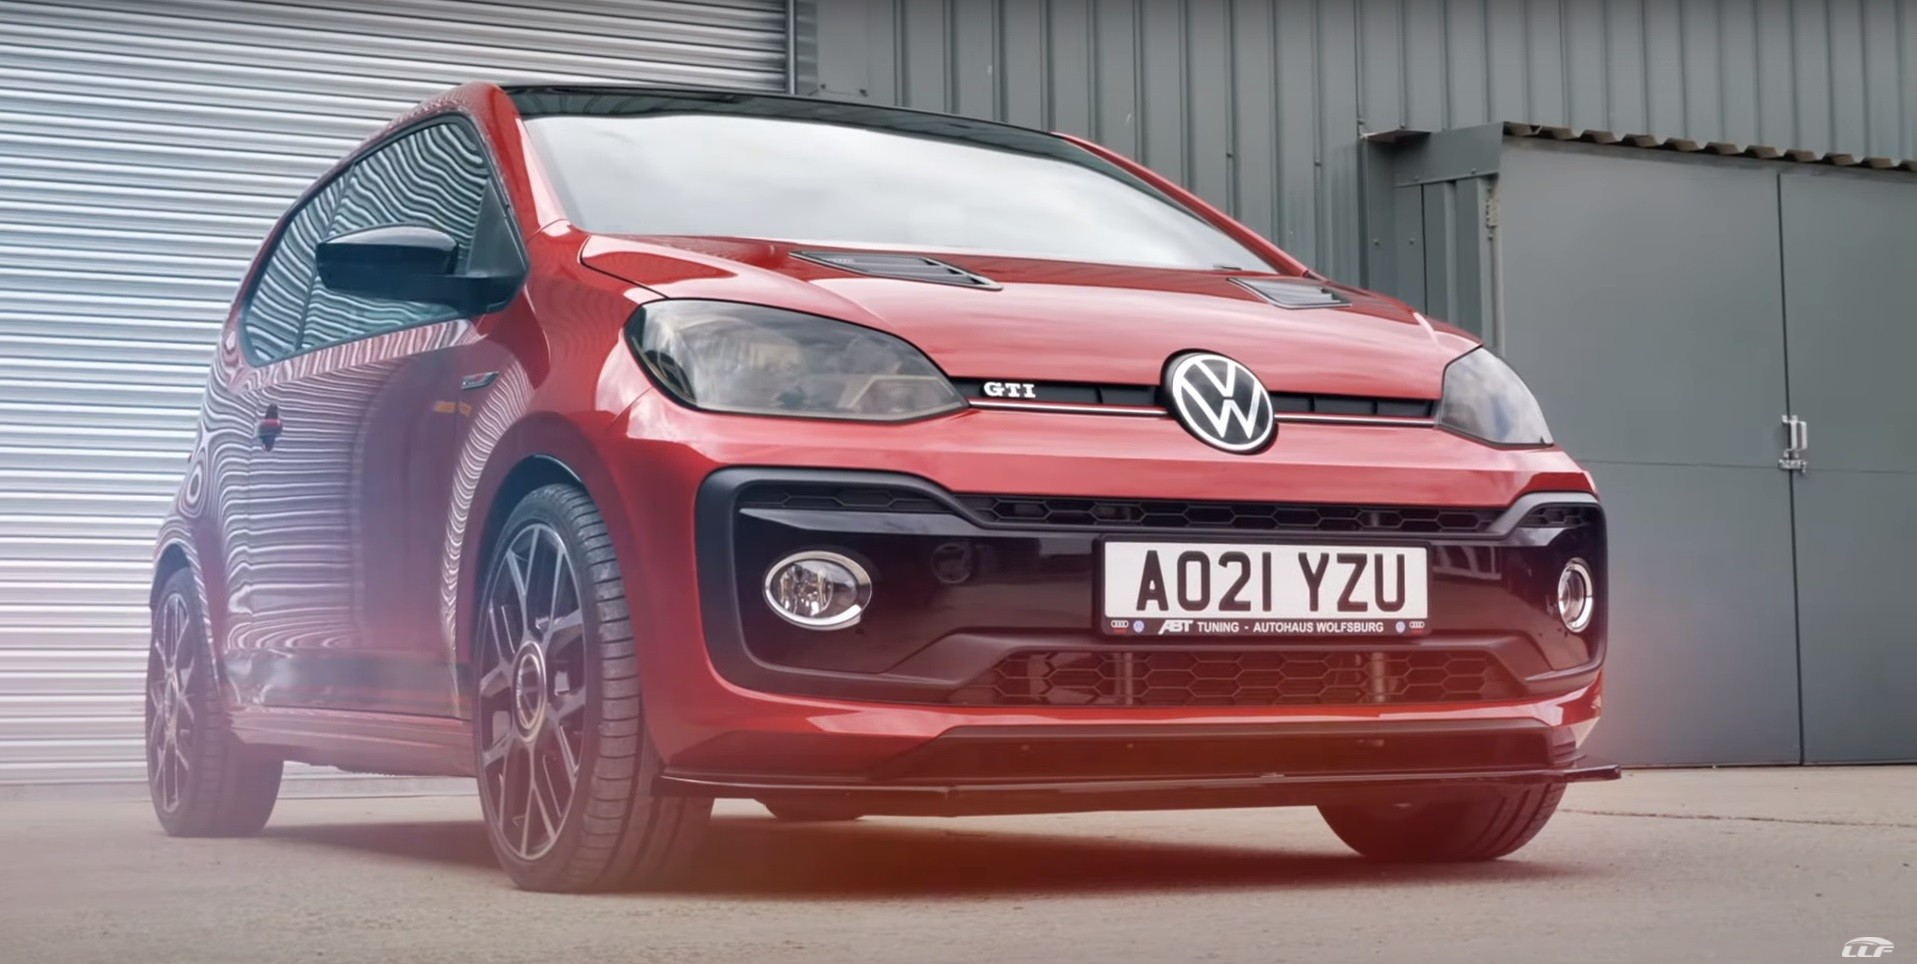 https://s1.cdn.autoevolution.com/images/news/gallery/168hp-10-liter-vw-up-gti-debunks-no-replacement-for-displacement-myth_10.jpg